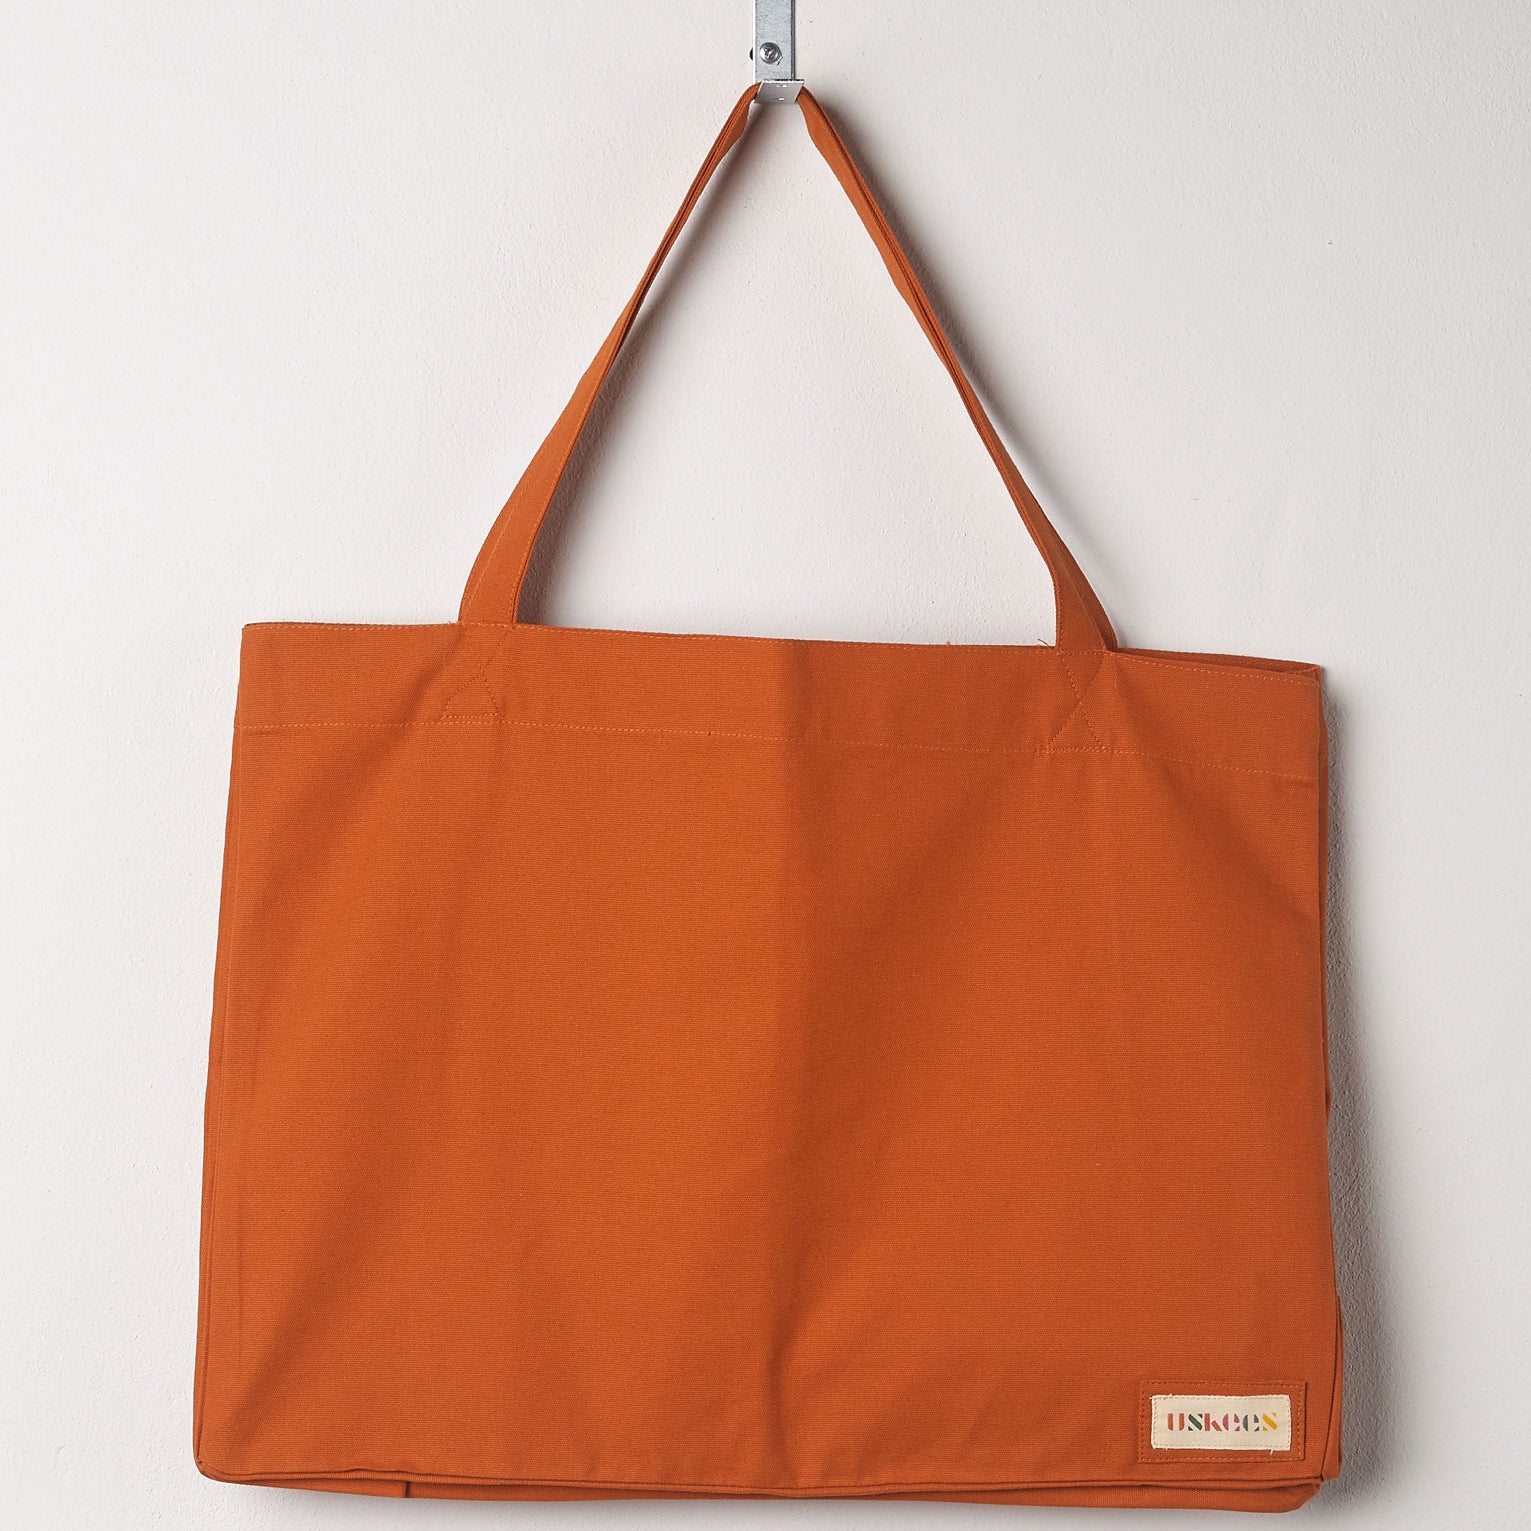 Full front hanging shot of Uskees #4001, large gold tote bag, showing double handles.